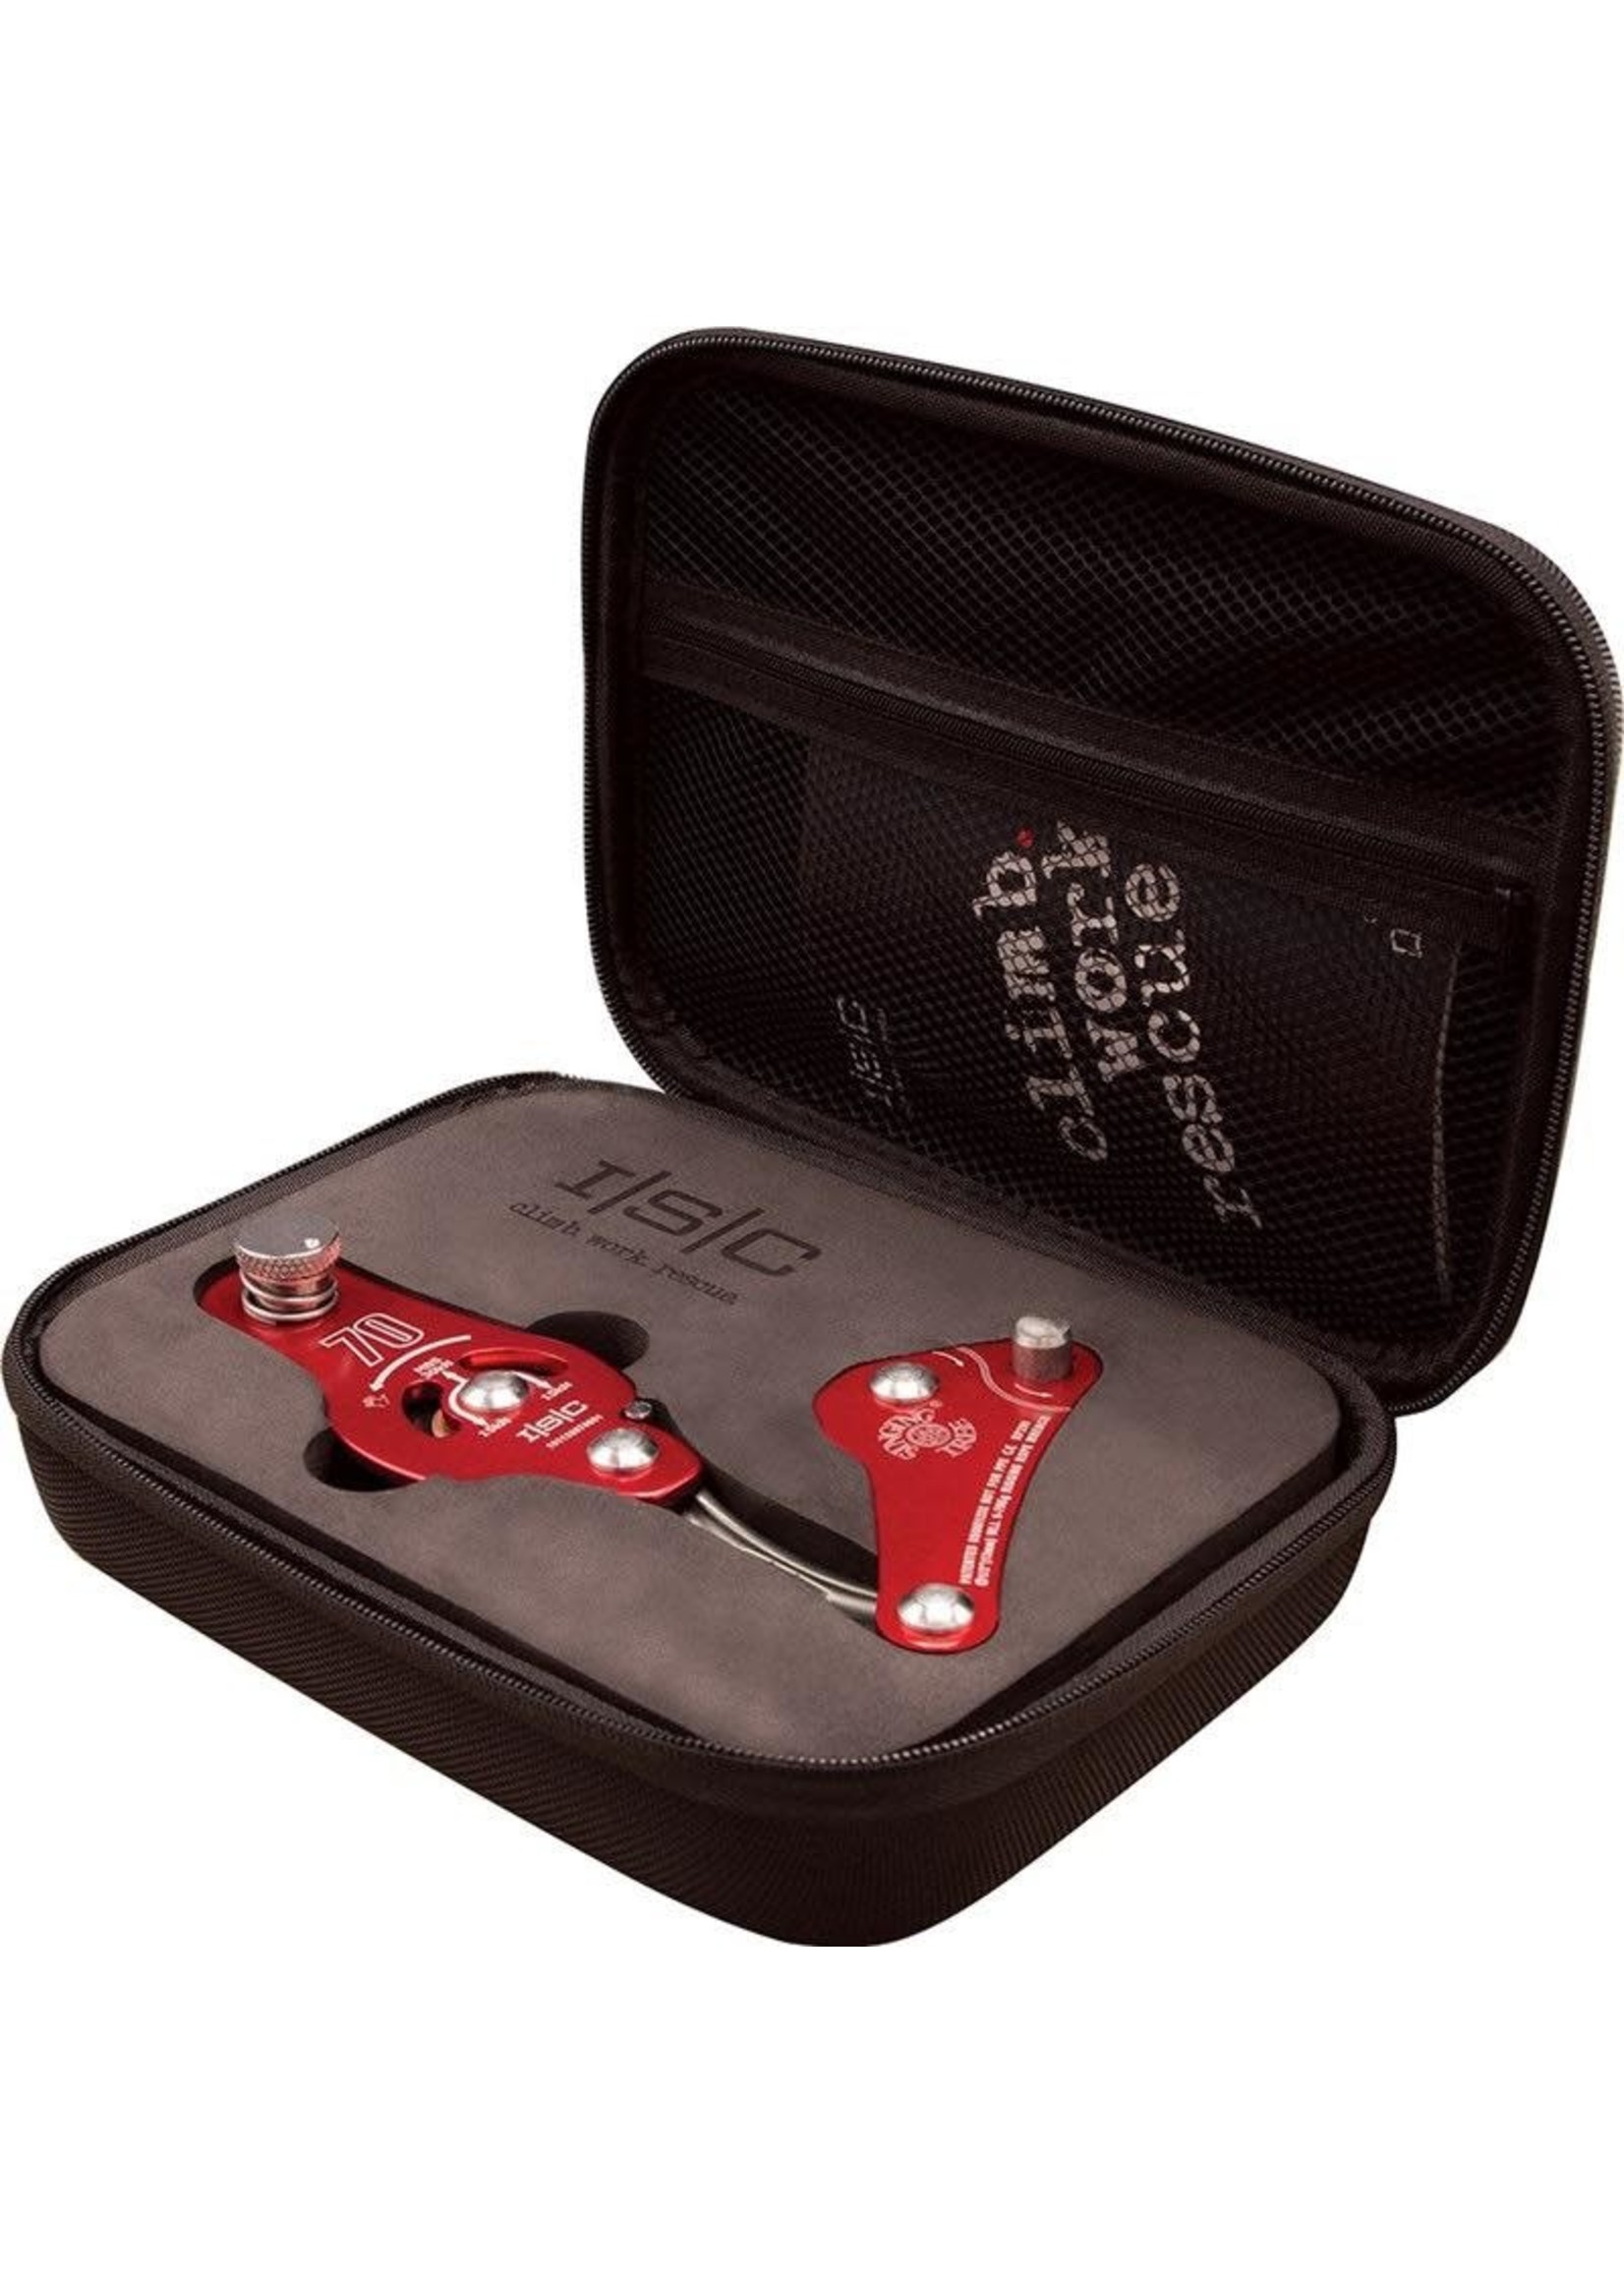 ISC, Rigging Rope Wrench RP290 in Case - Northeastern Arborist Supply